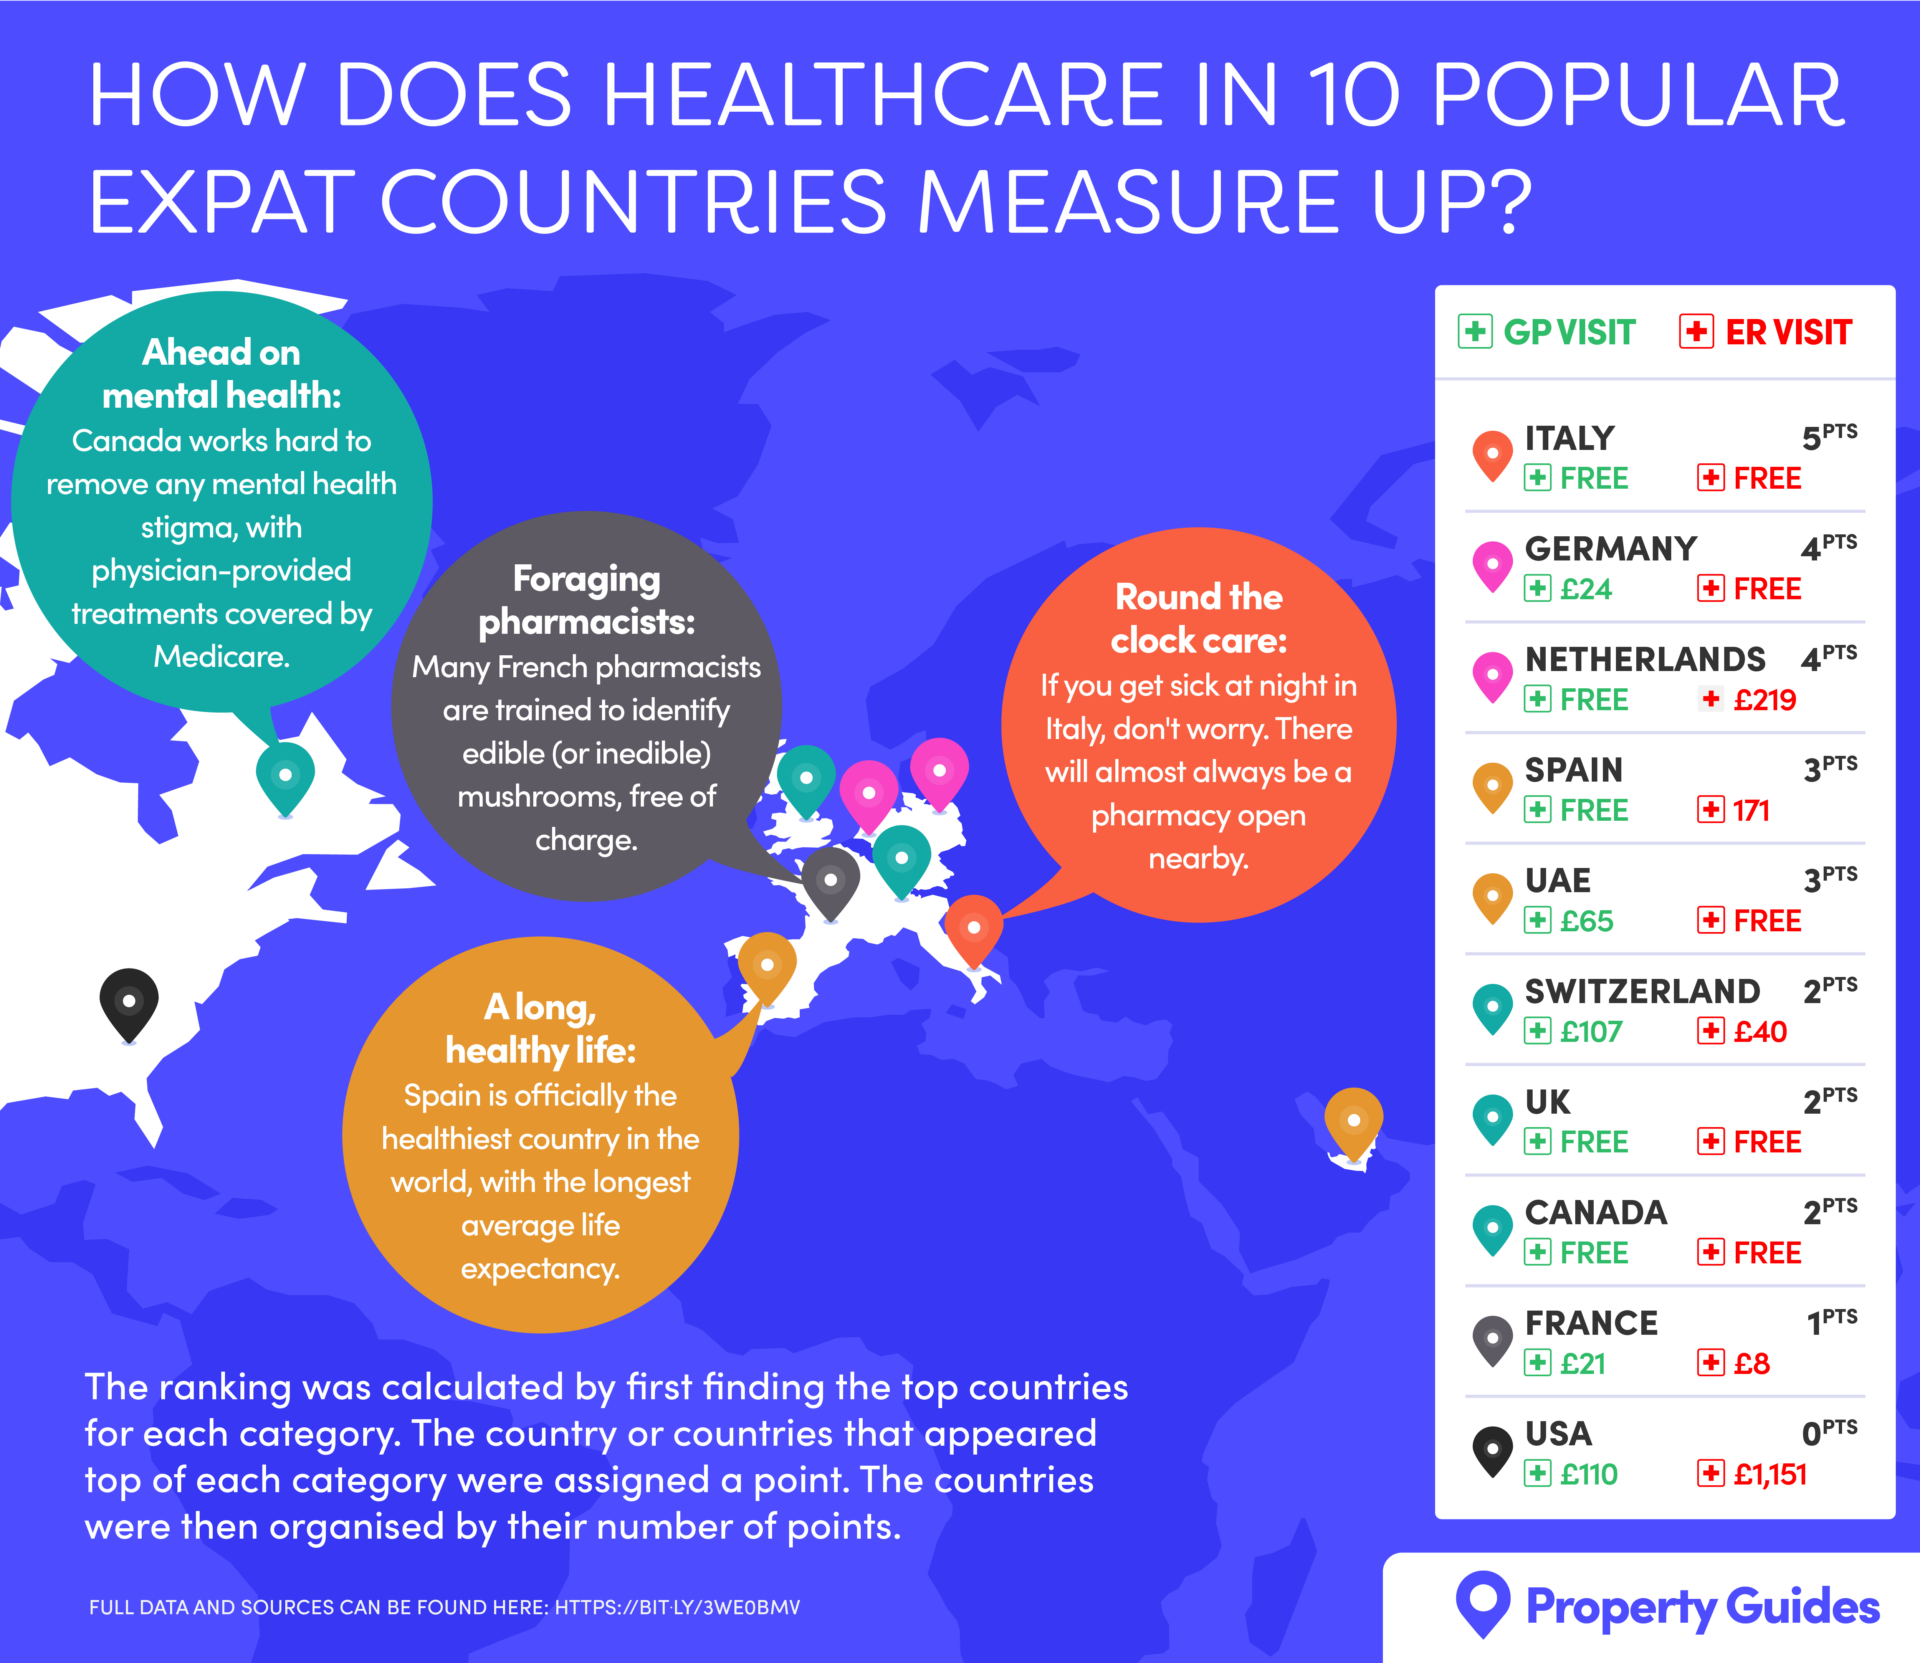 How does healthcare in 10 popular expat countries measure up?